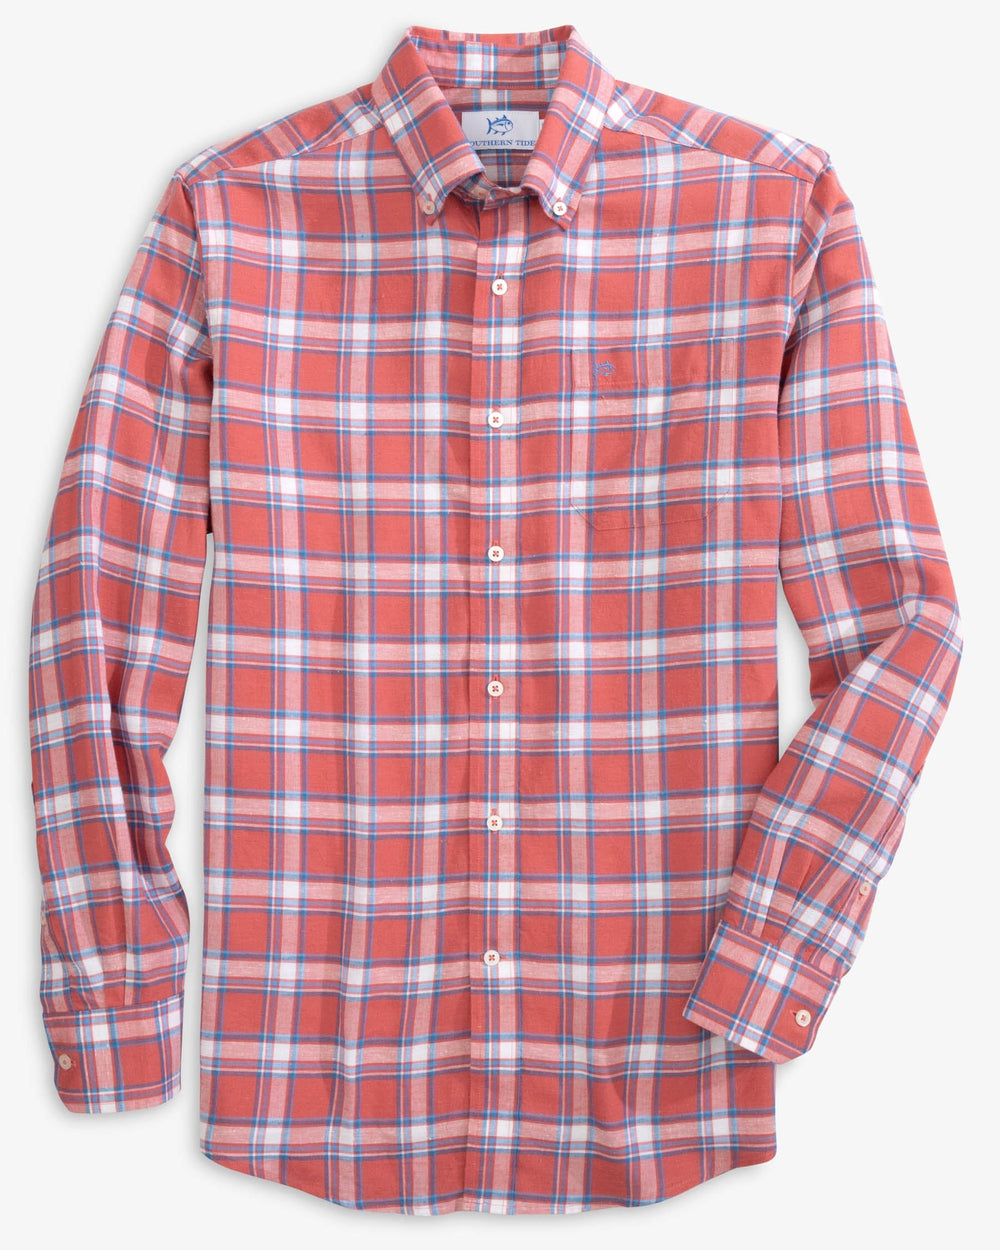 The front view of the Southern Tide Headland Bayfront Plaid Long Sleeve Buttom Down Sport Shirt - Mineral Red